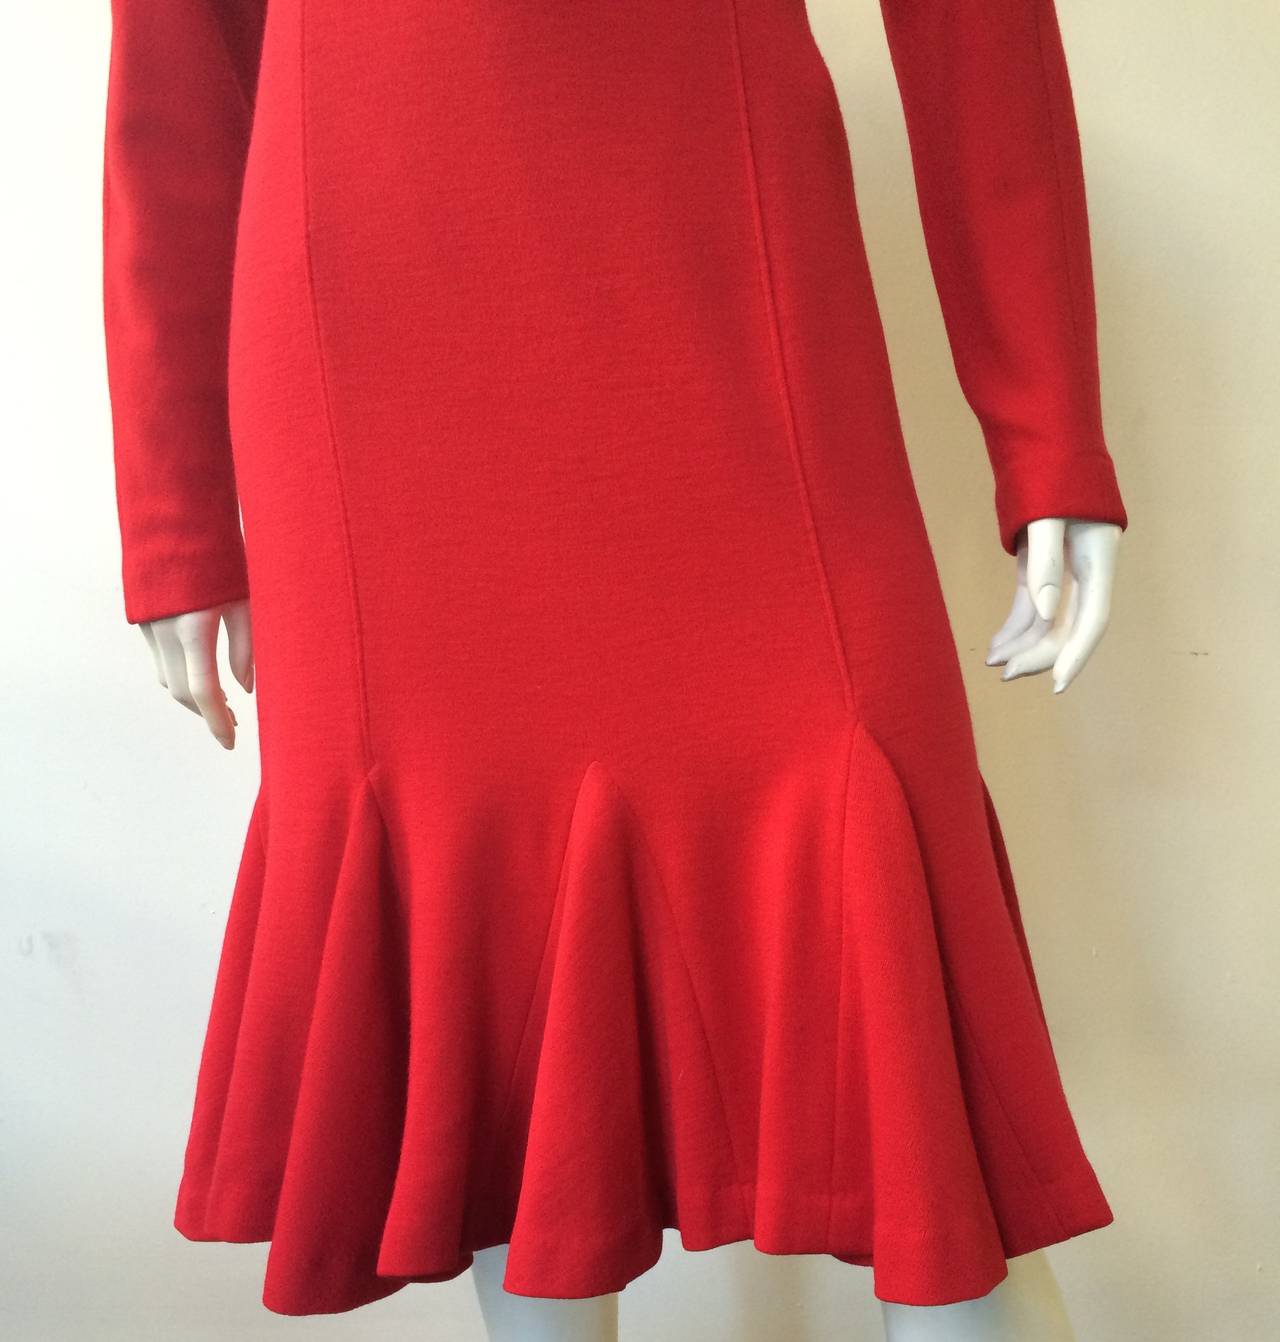  Hanae Mori for Neiman Marcus 1980s Red Wool Jersey Dress Size 6. In Good Condition For Sale In Atlanta, GA